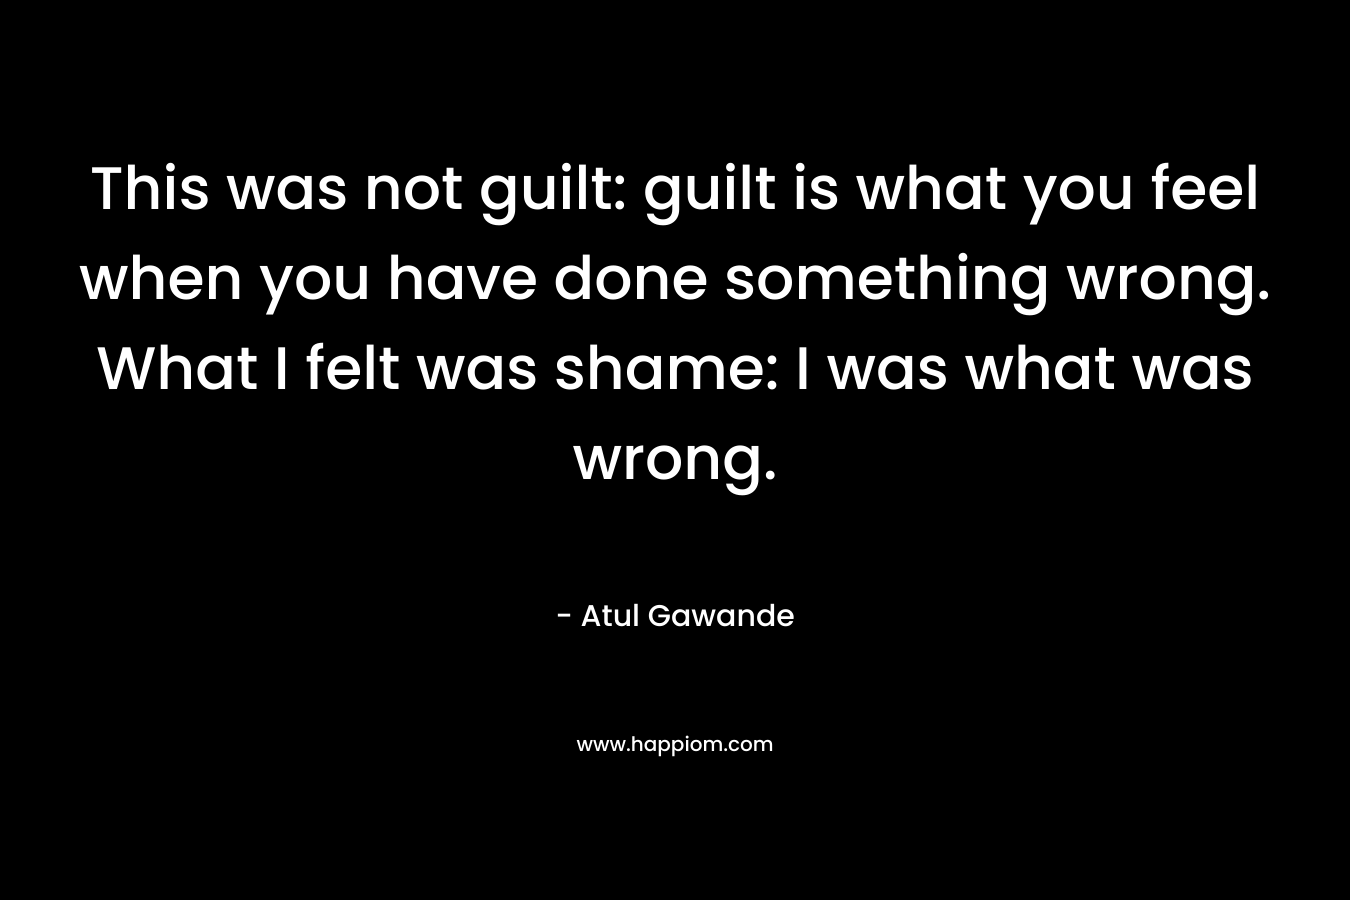 This was not guilt: guilt is what you feel when you have done something wrong. What I felt was shame: I was what was wrong. – Atul Gawande